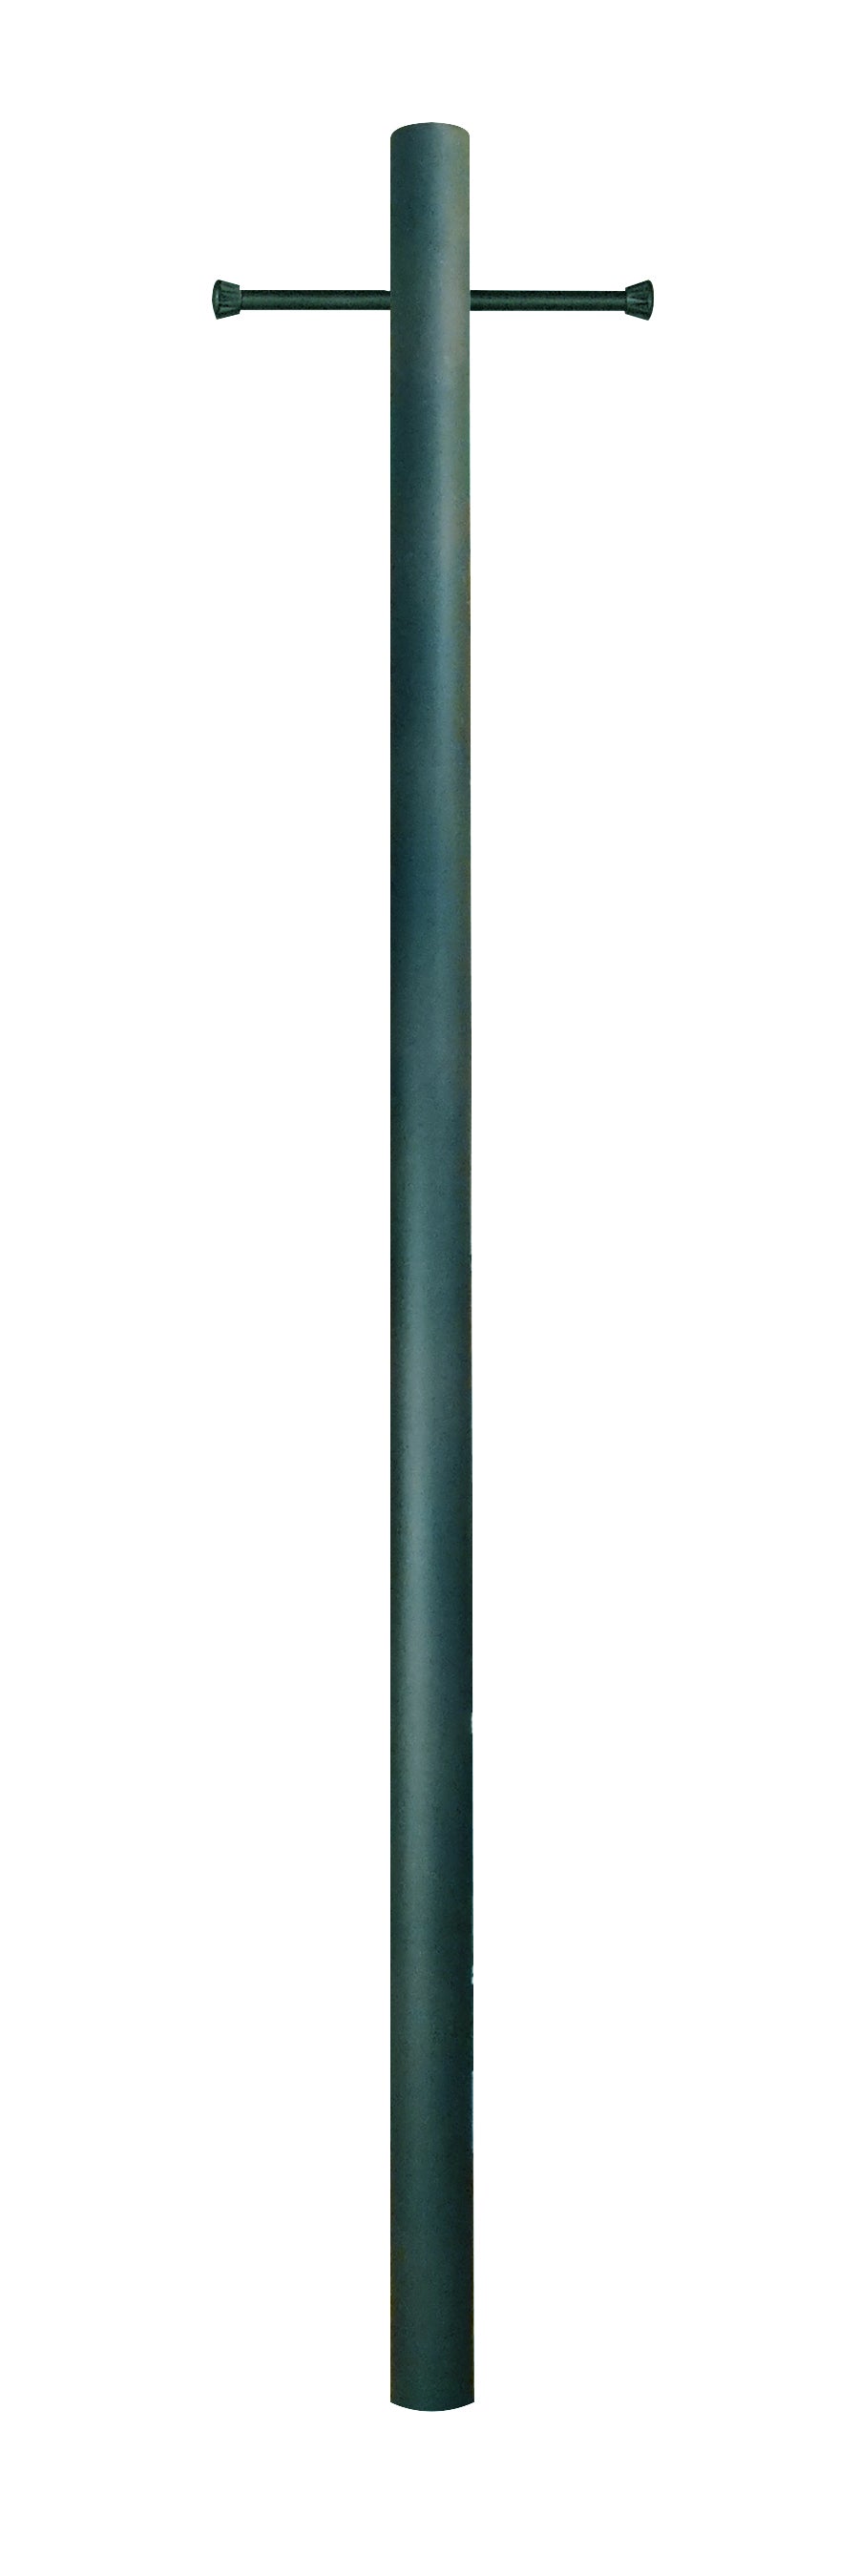 400-VG  7' Smooth Aluminum Direct Burial Post with Ladder Rest